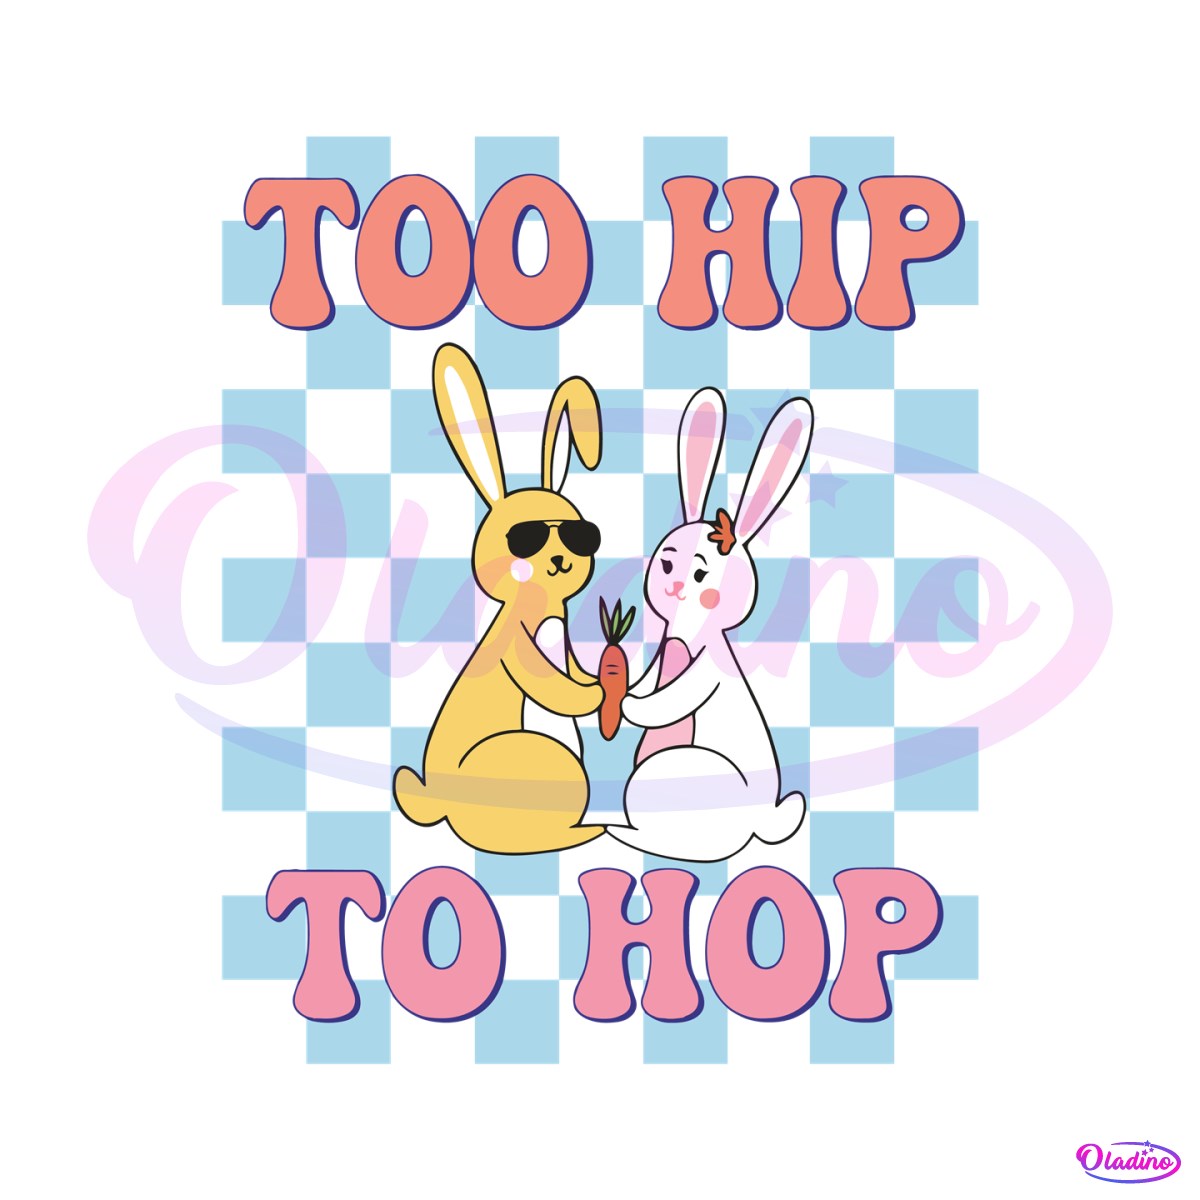 too-hip-to-hop-bunny-couples-easter-svg